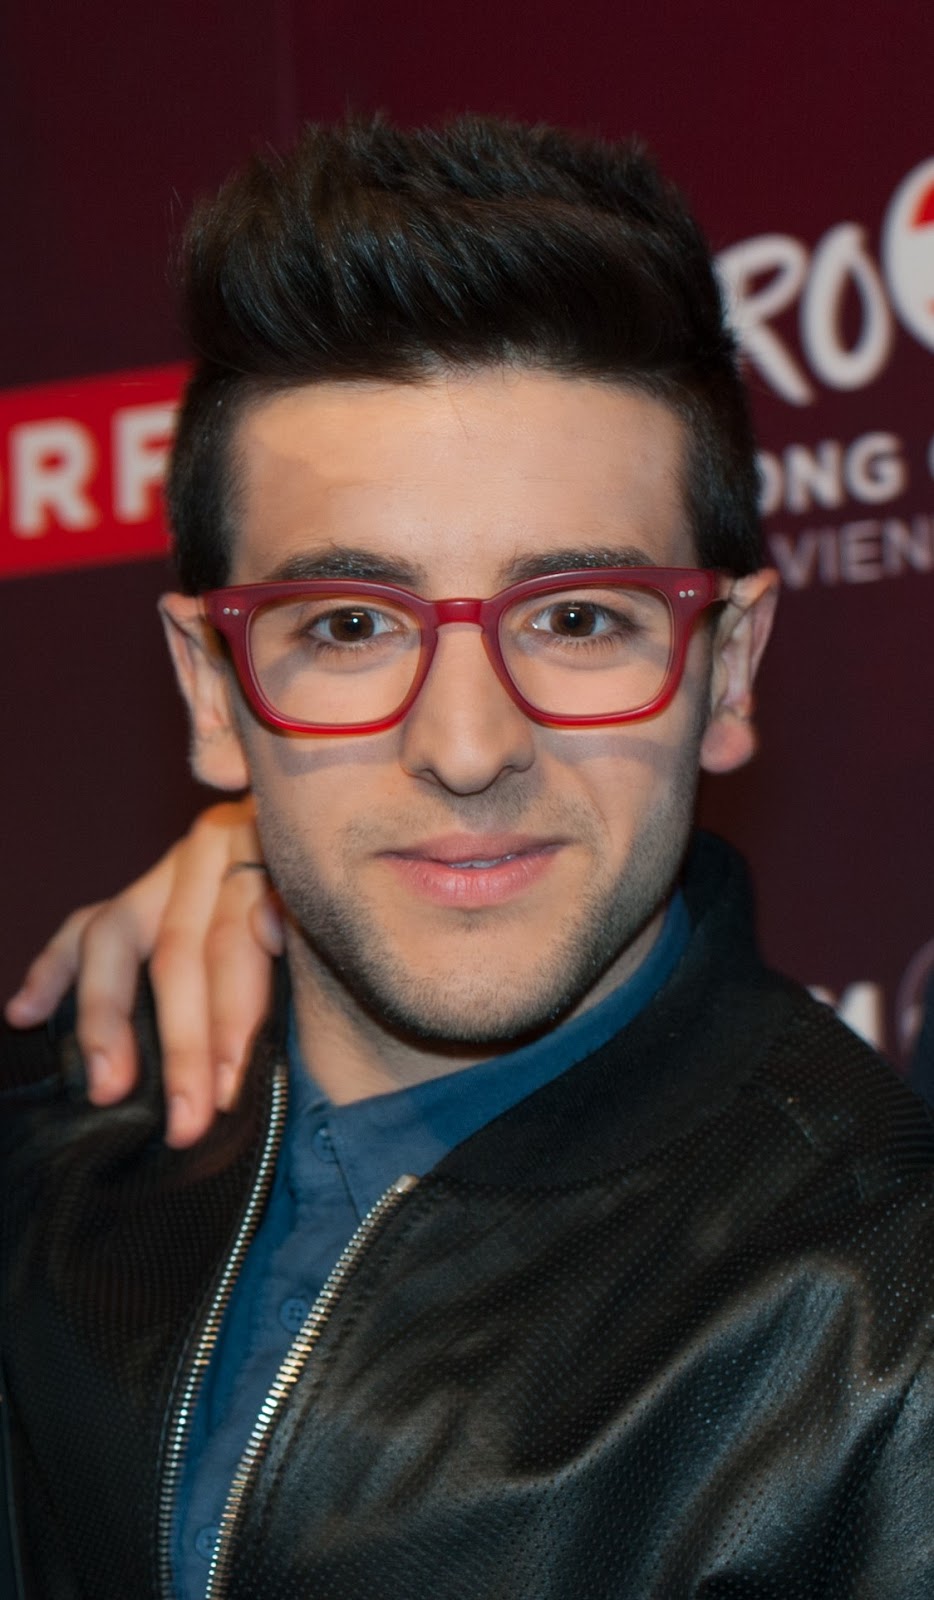 Piero Barone, one of the stars of the group Il Volo.